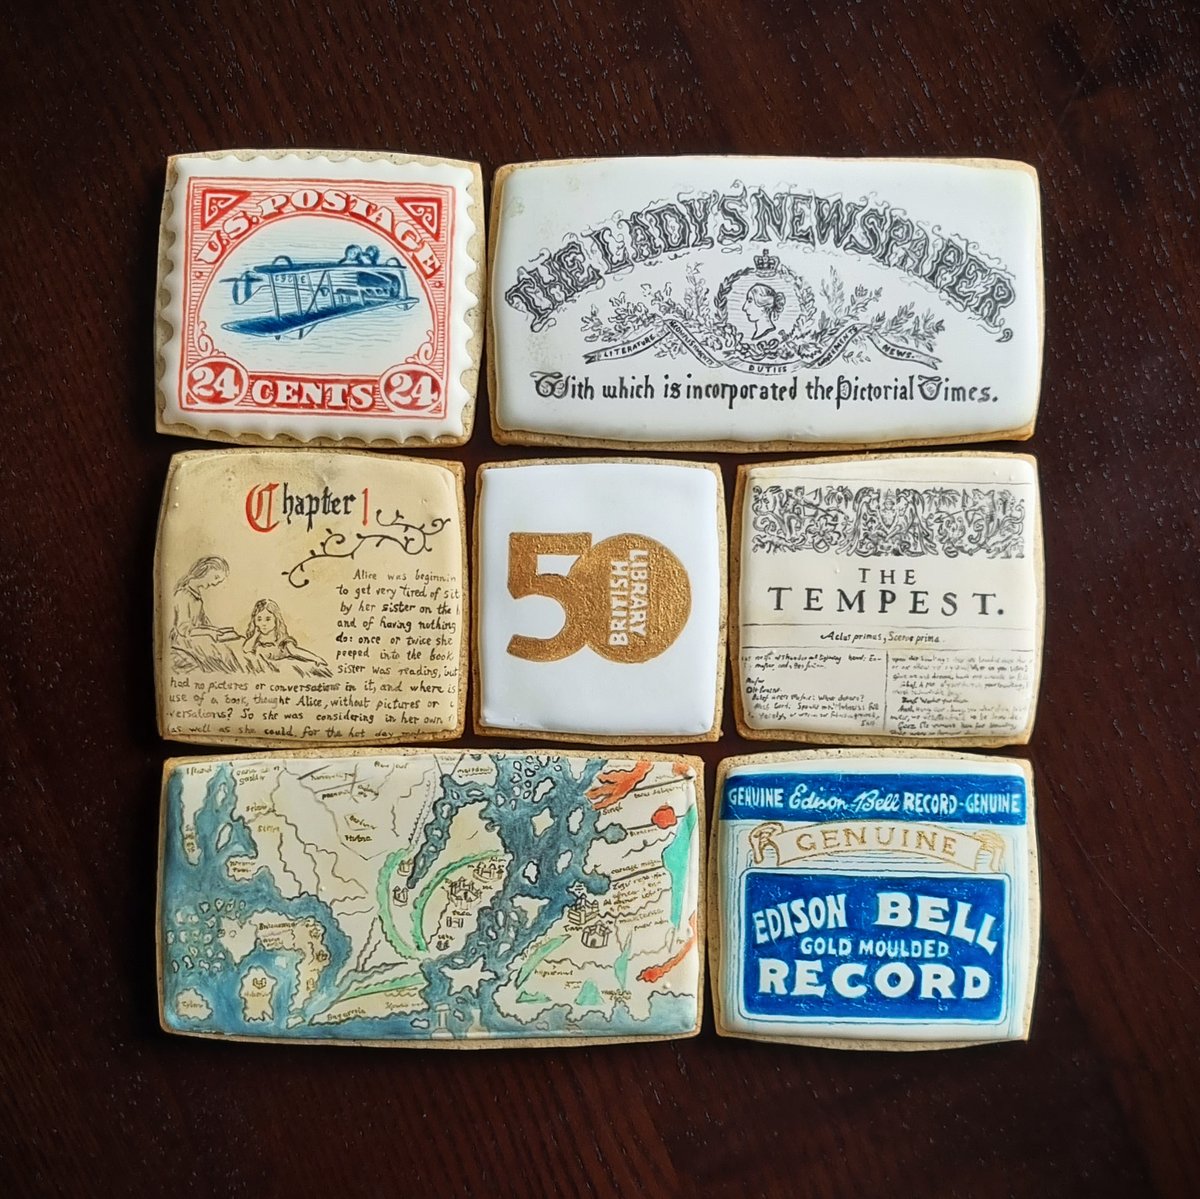 It’s the @BritishLibrary’s 50th birthday! This biscuit (cookie) set is inspired by the British Library’s wonderful collections. Each biscuit depicts an item from one of their six core collection areas: stamps, newspapers, manuscripts, printed materials, maps, and sounds. 🍪